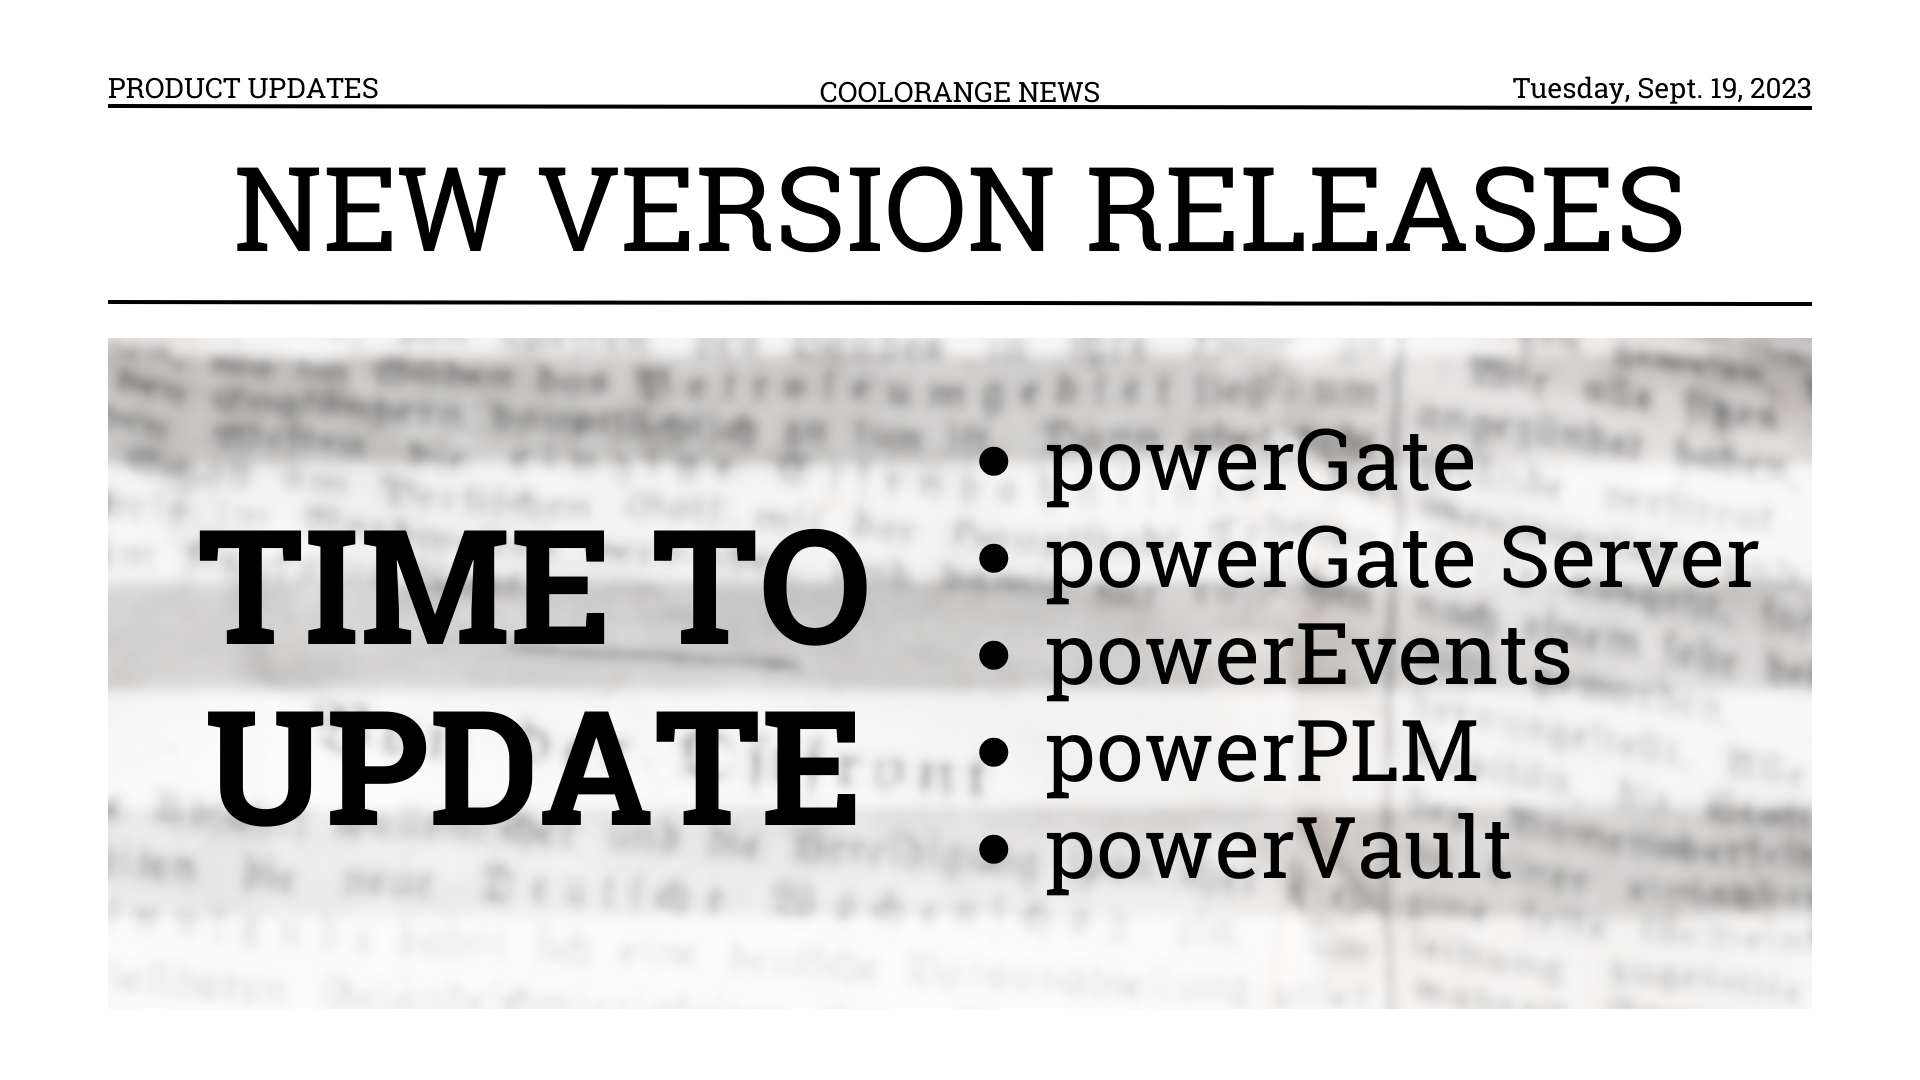 Products Updates - powerGate, powerEvents, powerPLM and more...